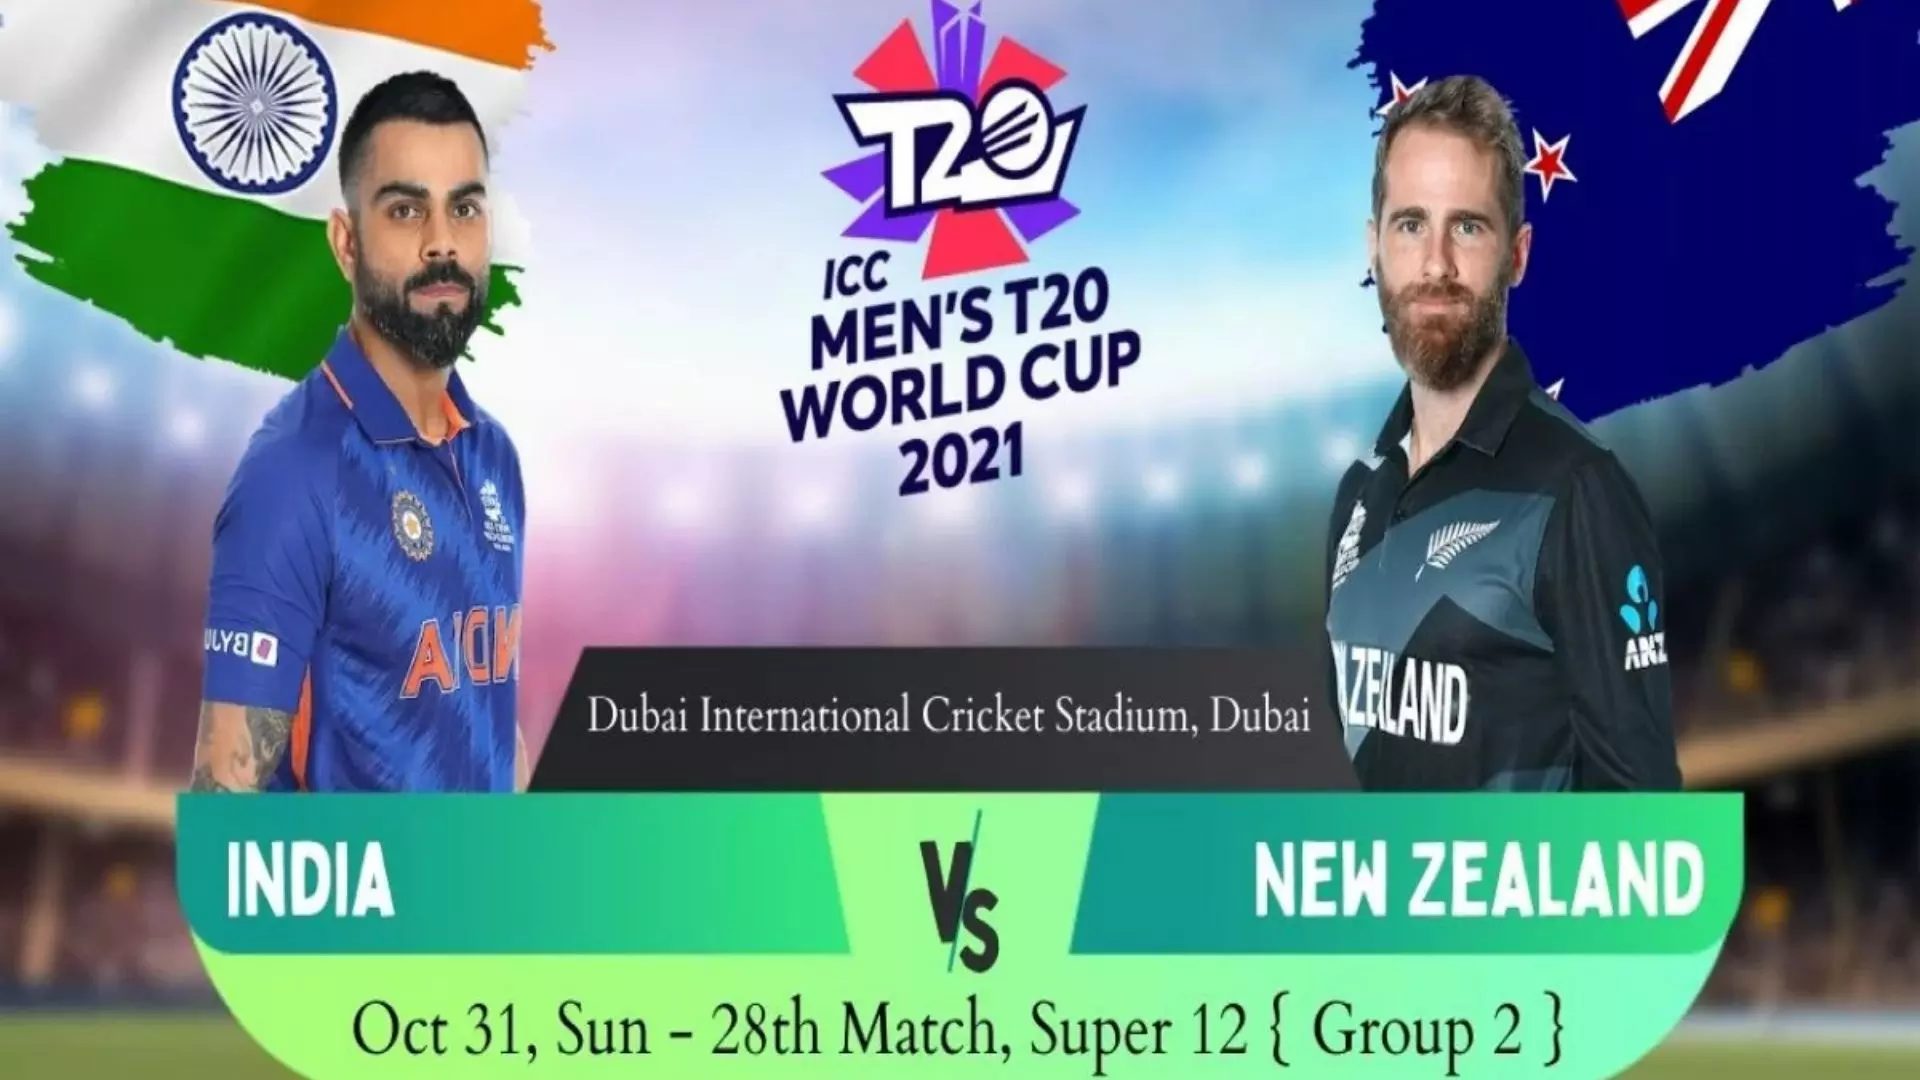 T20 World Cup 2021 India Vs New Zealand Match Preview Today 31st October 2021 - Cricket News